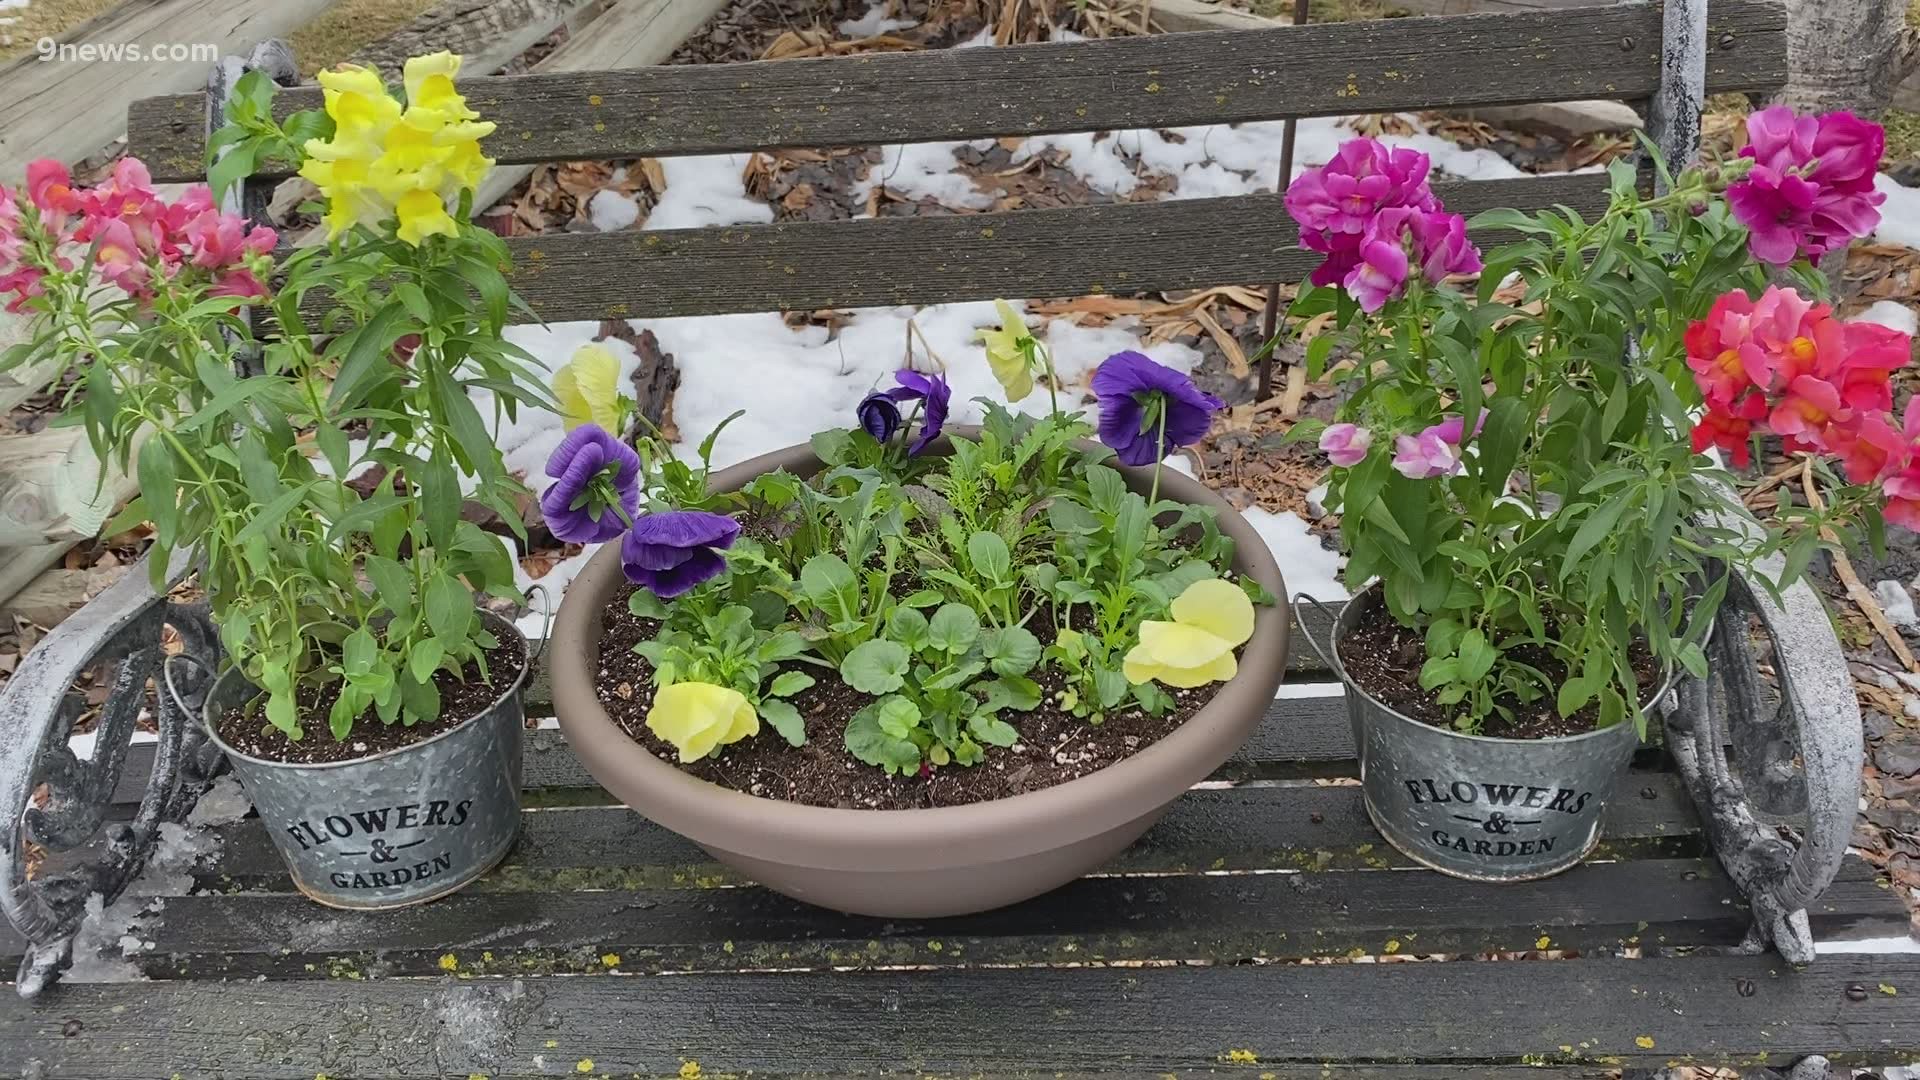 It's time to add some much-needed color to your garden. With a little fertilizer, pansies and snapdragons can be the perfect spring addition.